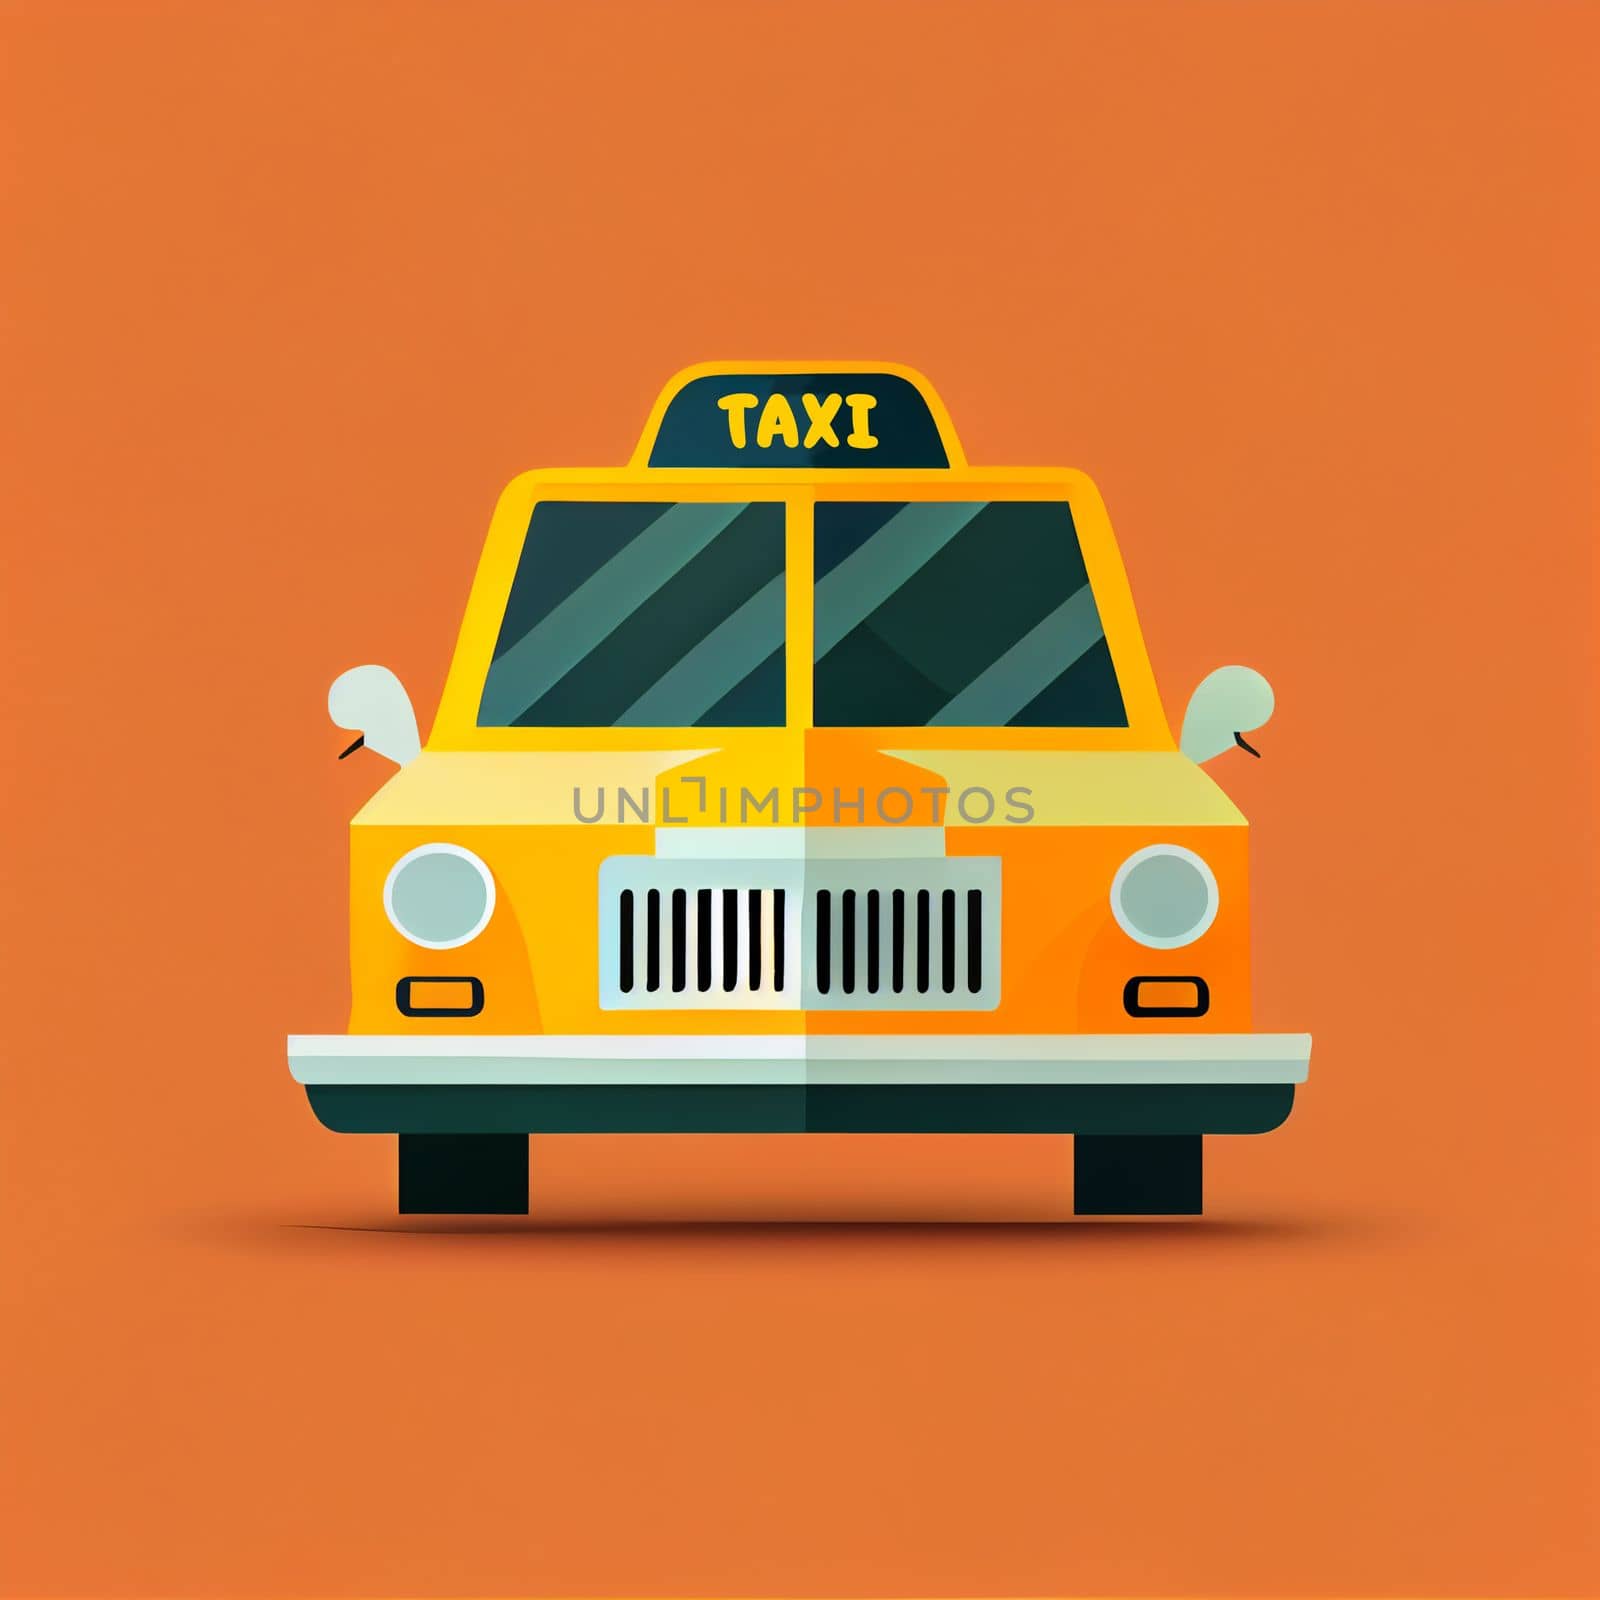 Modern flat design of Transport public transportable taxi for transportation in city. by FokasuArt